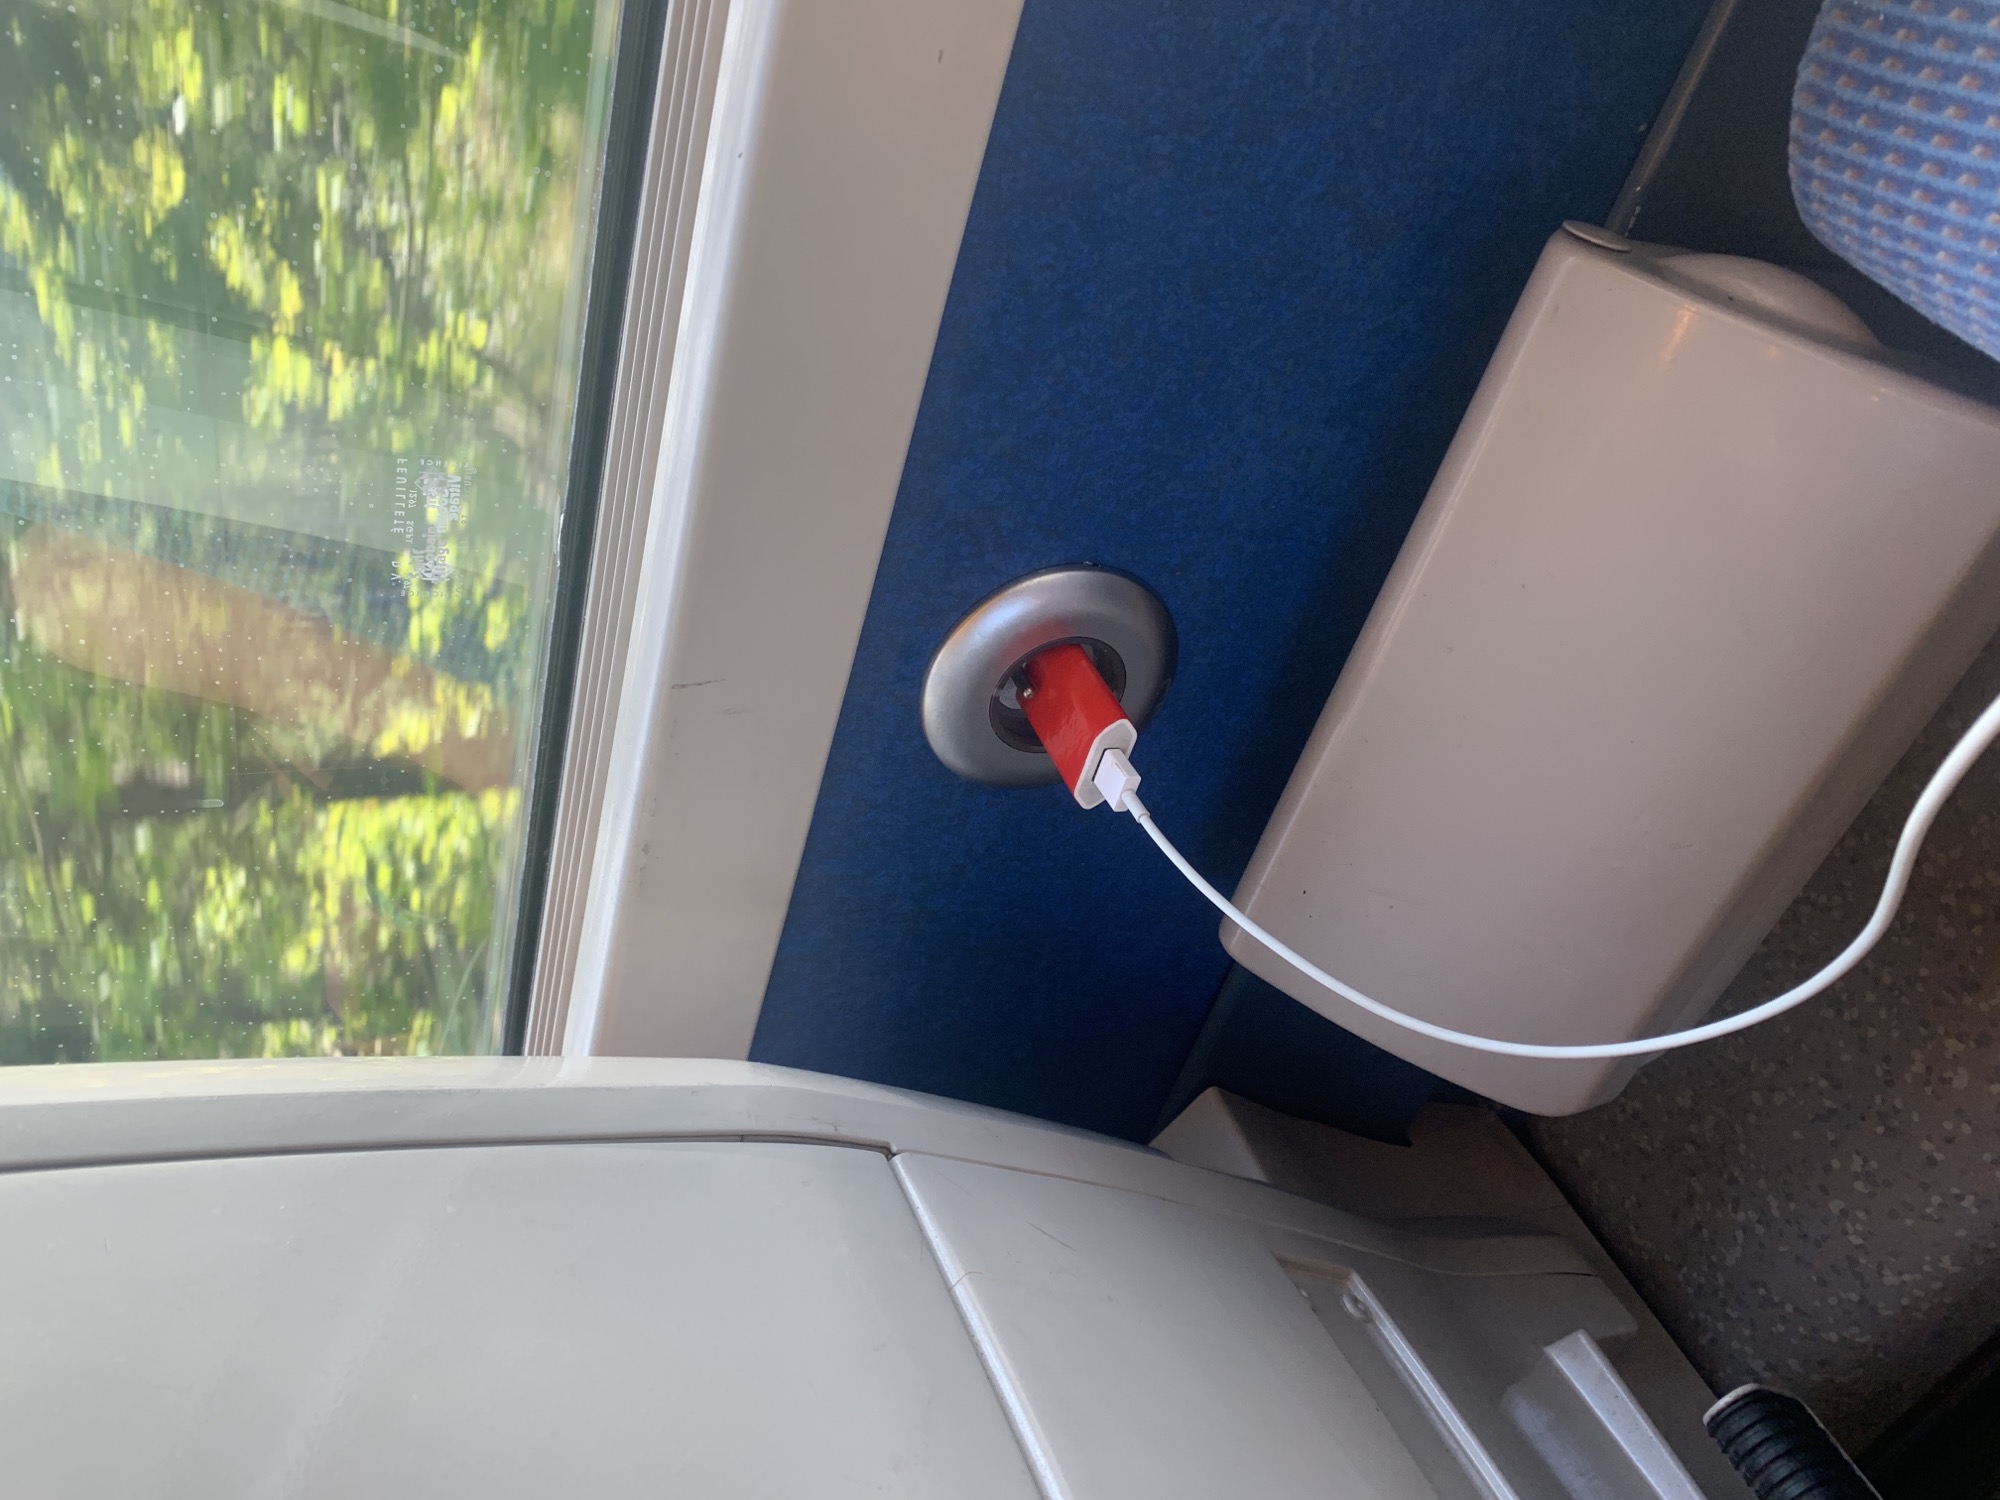 Emma's phone charger on the train